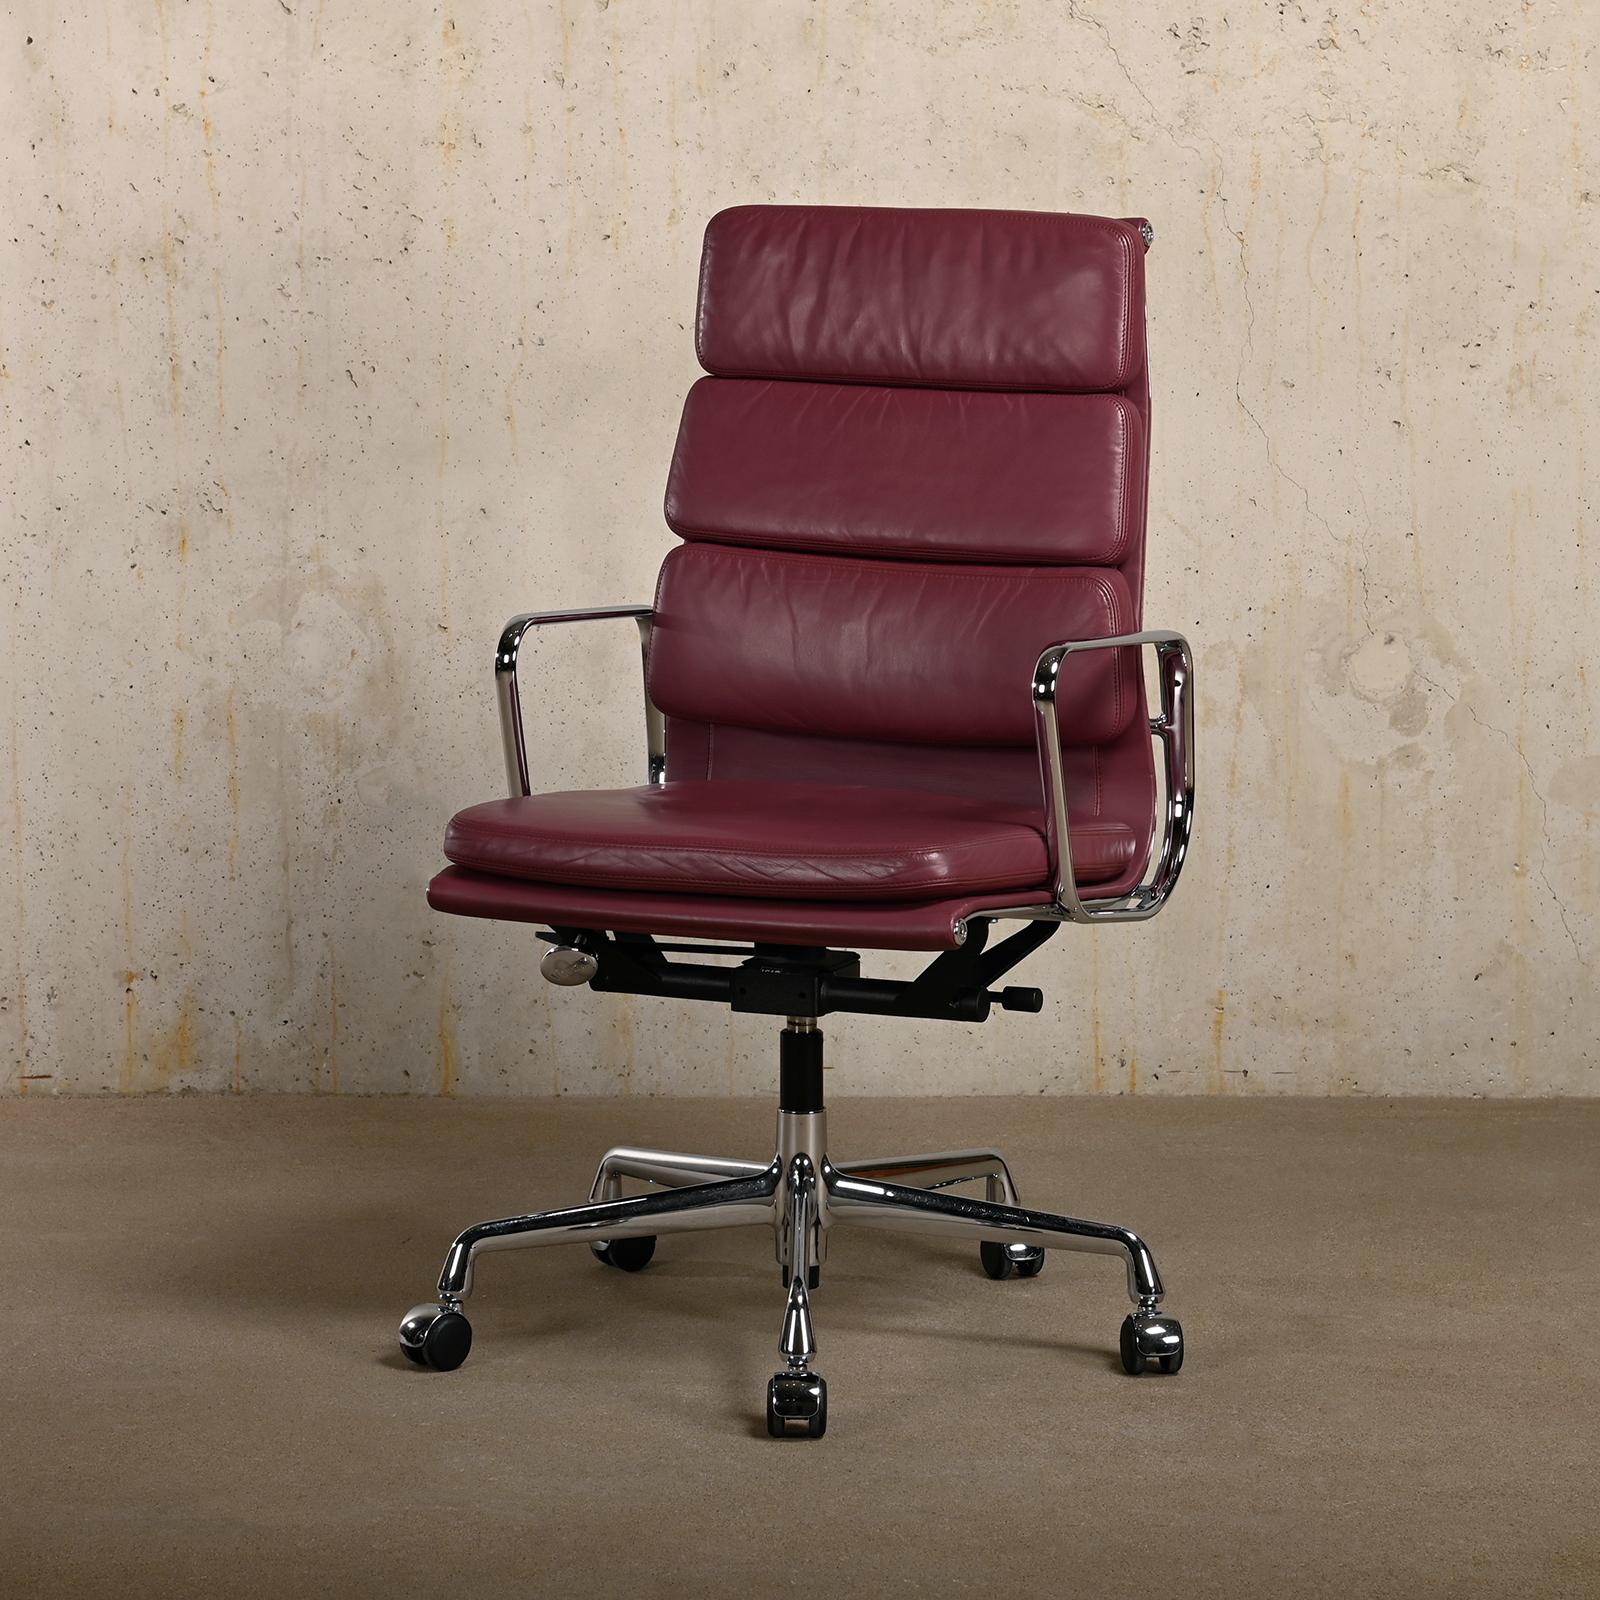 Beautiful office chair EA219 belonging to the iconic Aluminium Series designed by Charles & Ray Eames for Herman Miller (US) / Vitra (EU). Exceptional comfort is guaranteed with the cushions in leather, height adjustment and tilt/swivel mechanism,